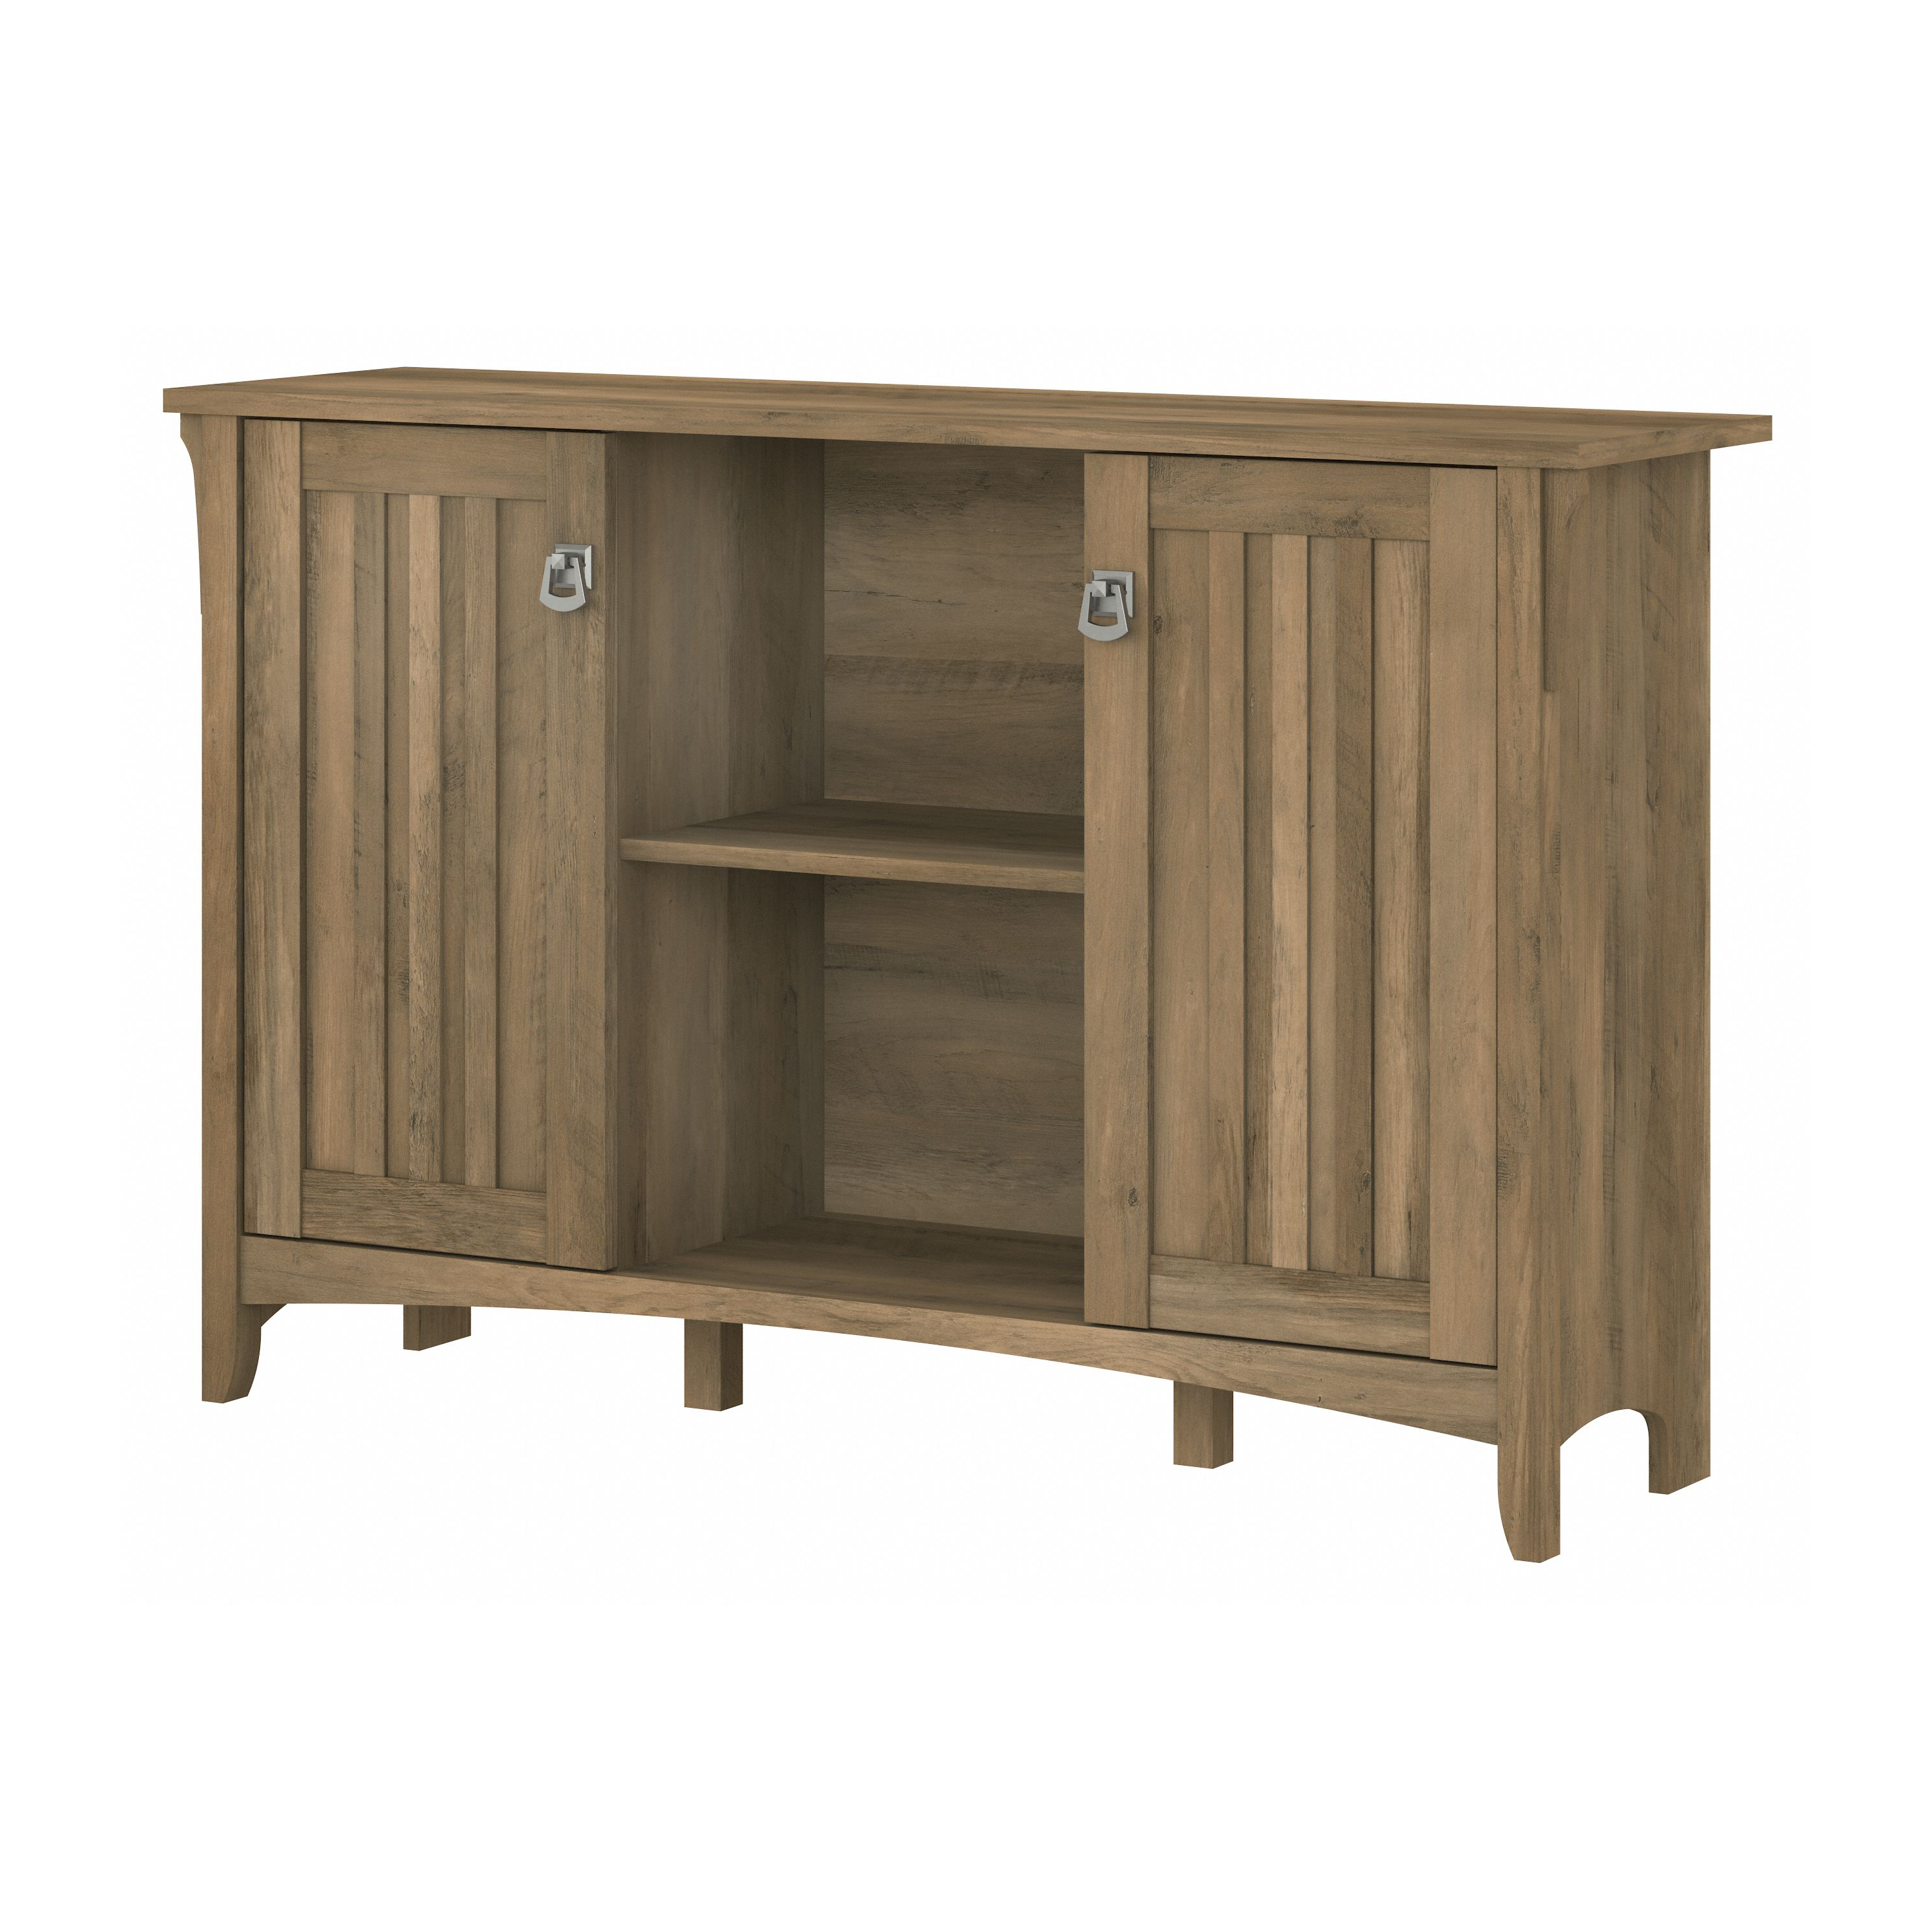 Shop Bush Furniture Salinas Accent Storage Cabinet with Doors 02 SAS147RCP-03 #color_reclaimed pine